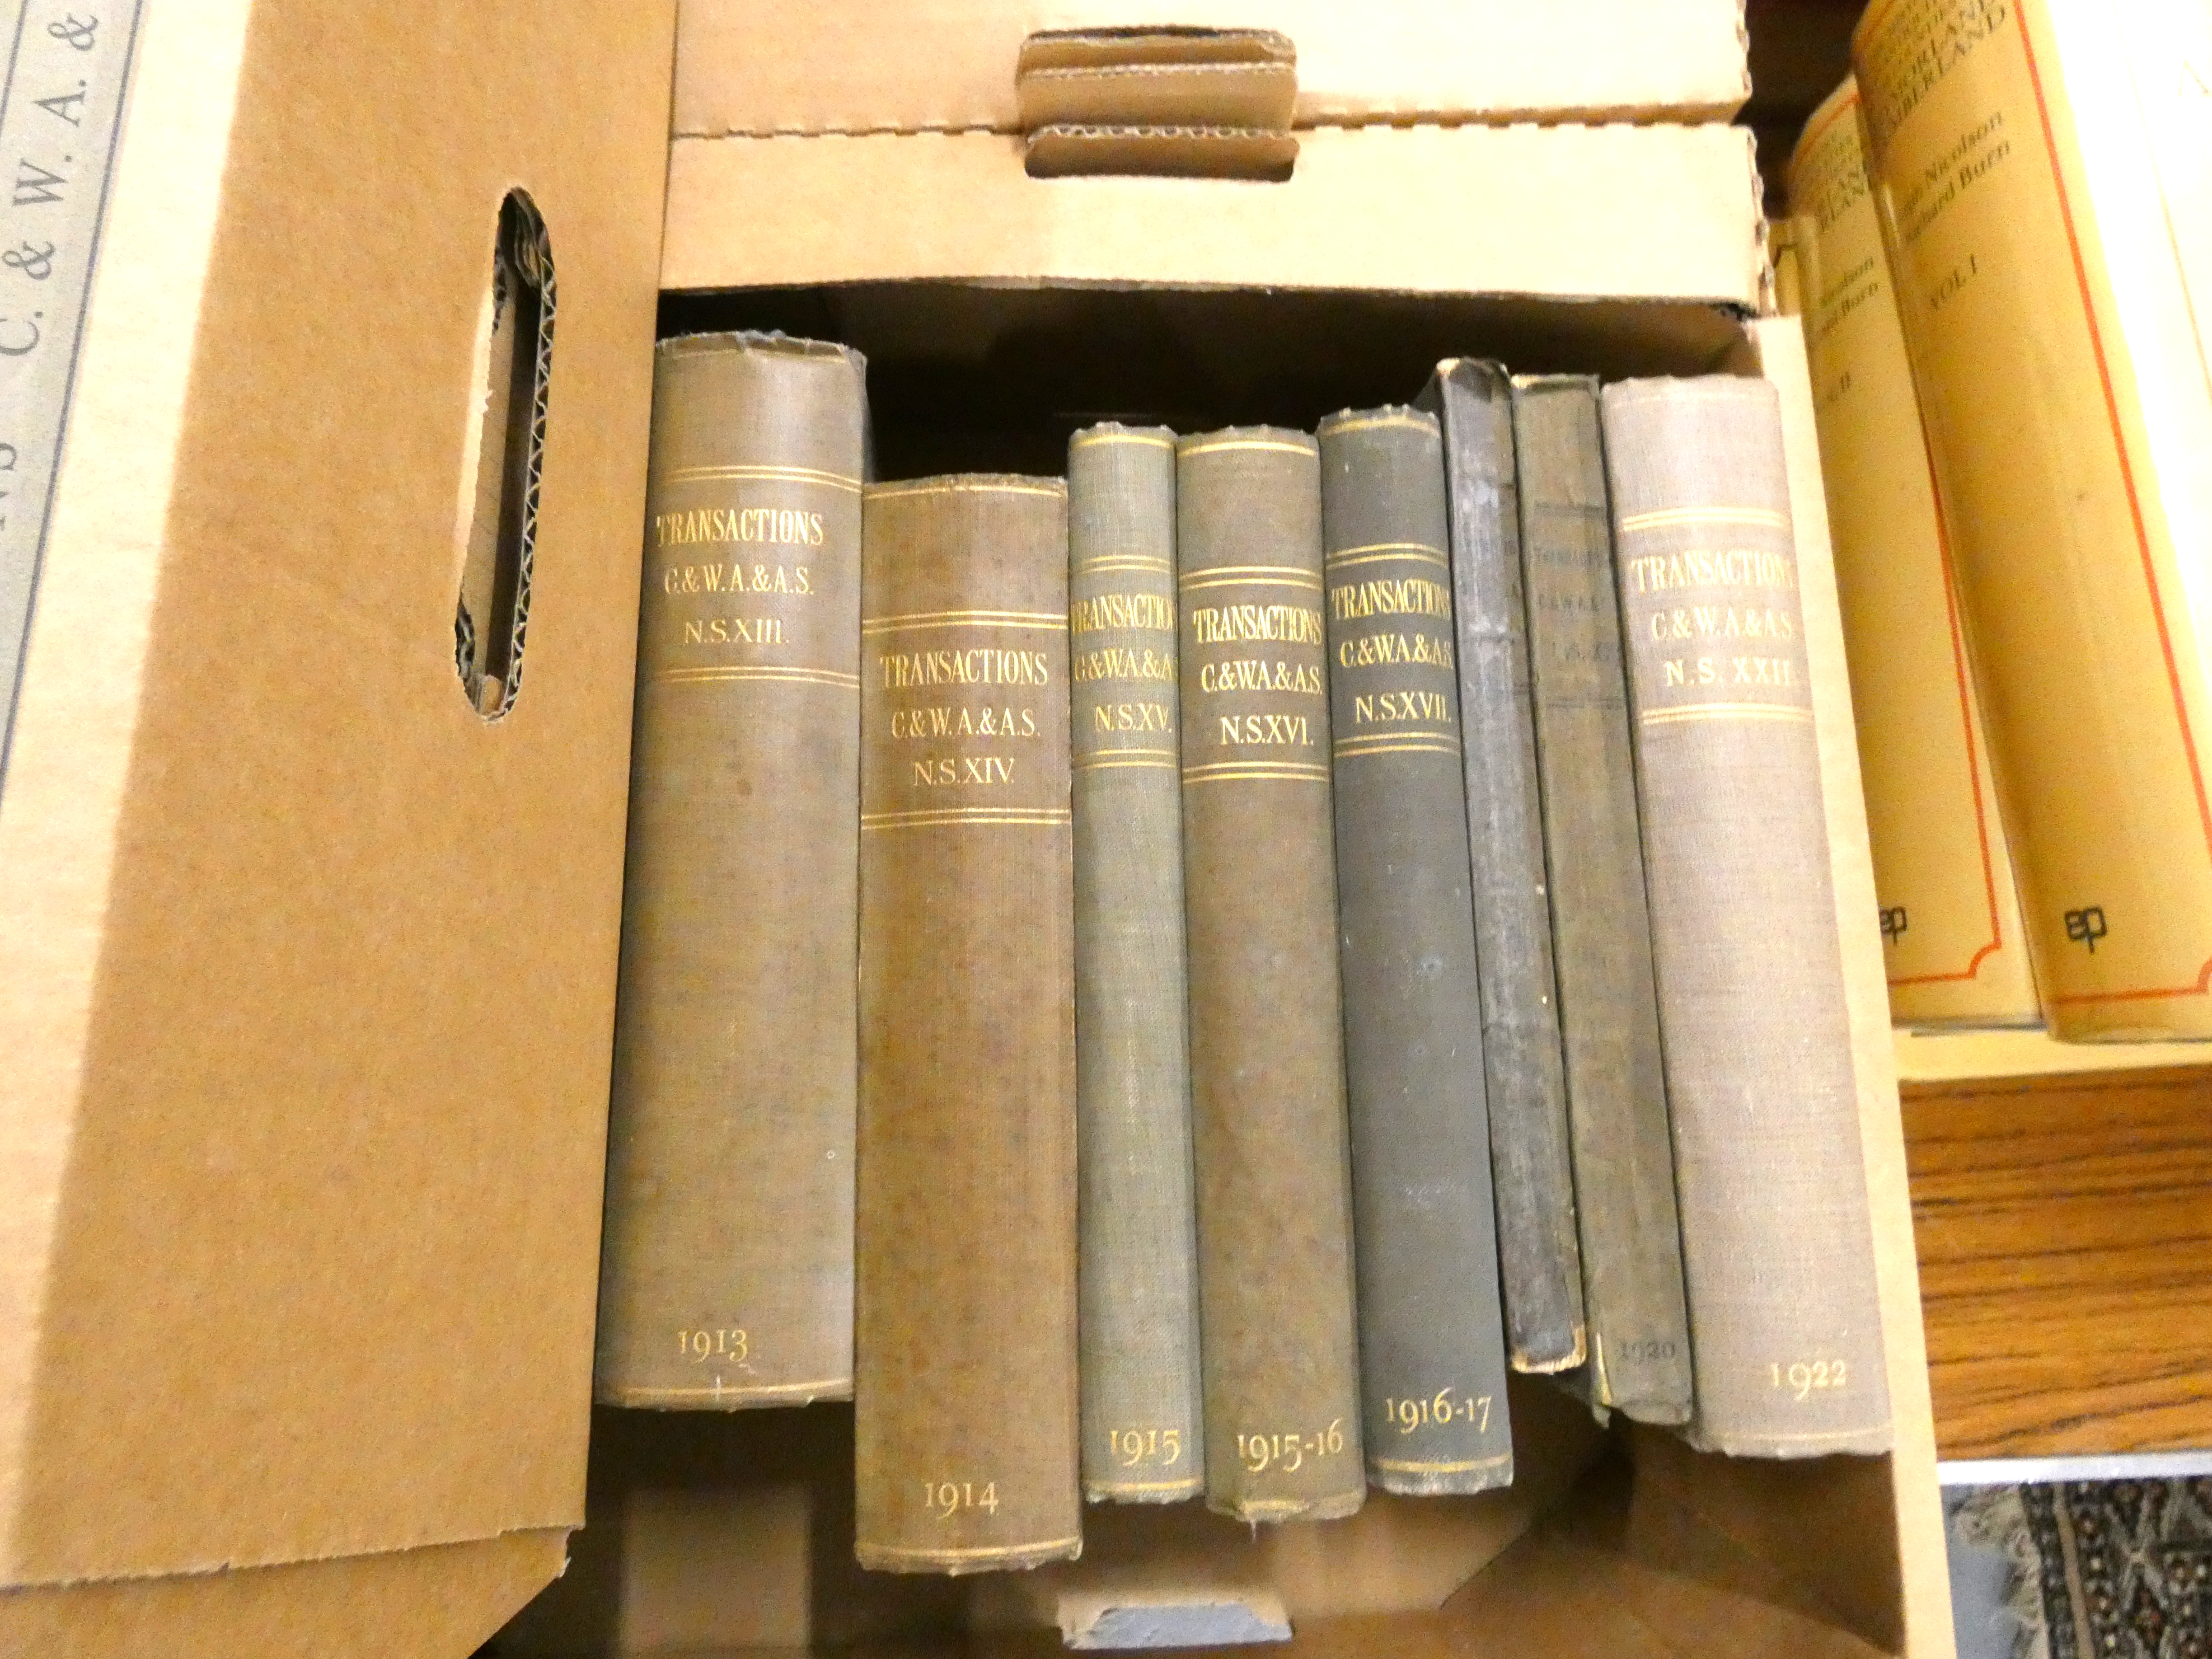 CUMBERLAND & WESTMORLAND ANT. & ARCH. SOCIETY.  Transactions - New Series. Vols. 1 to 7, 9, 11, 13 - Image 6 of 6